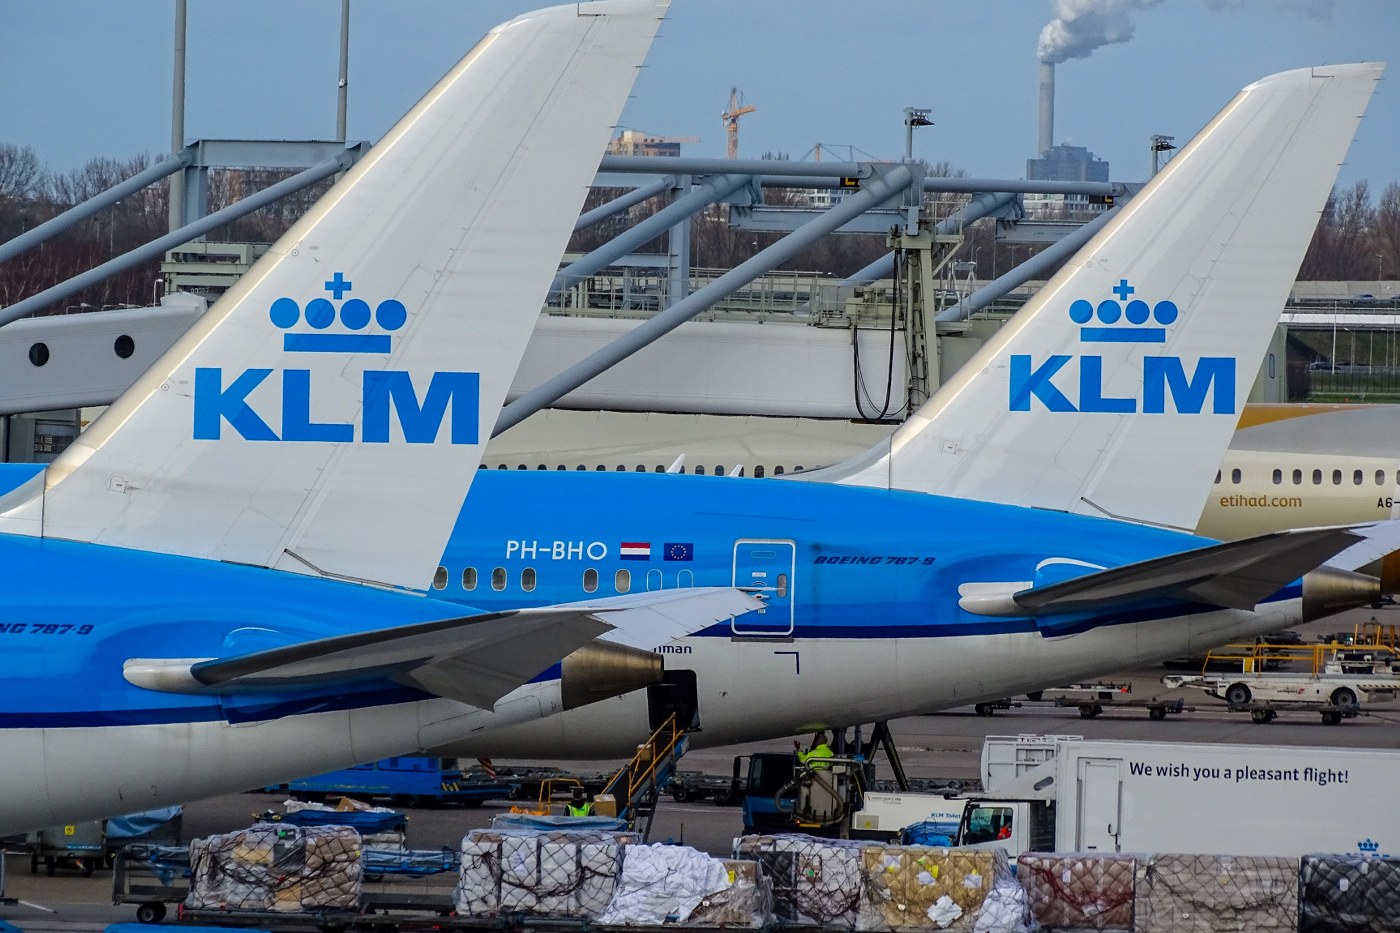 KLM - green airlines